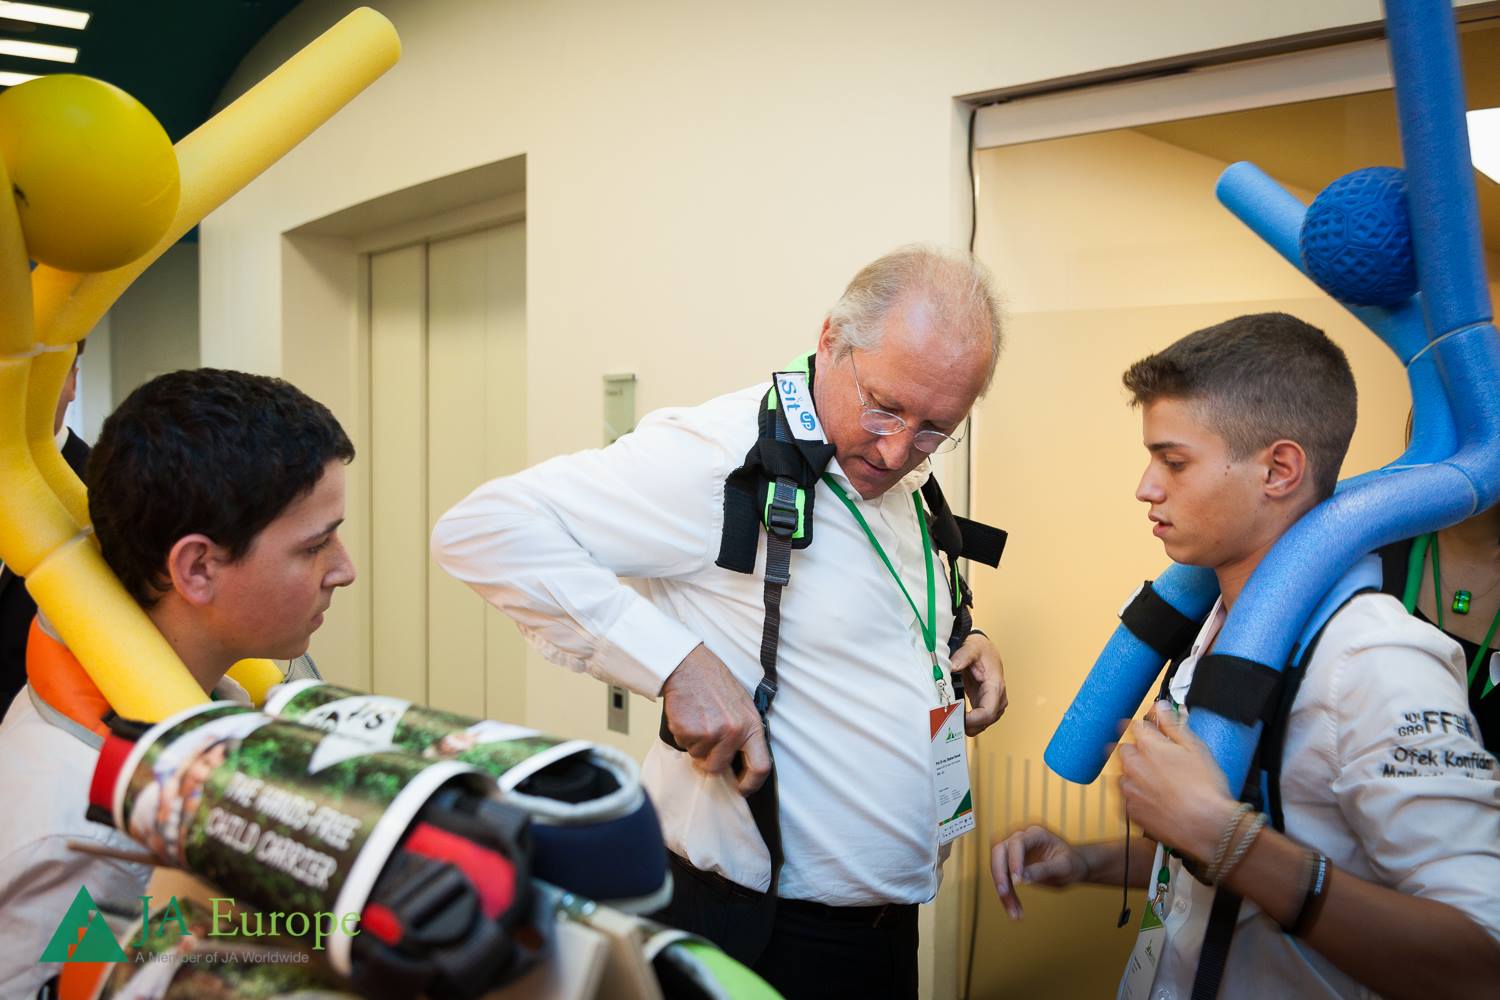 CEO of General Europe, Professor Stephan Remelt, bought a Sit Up harness from the Israeli team. Photo: JA Europe